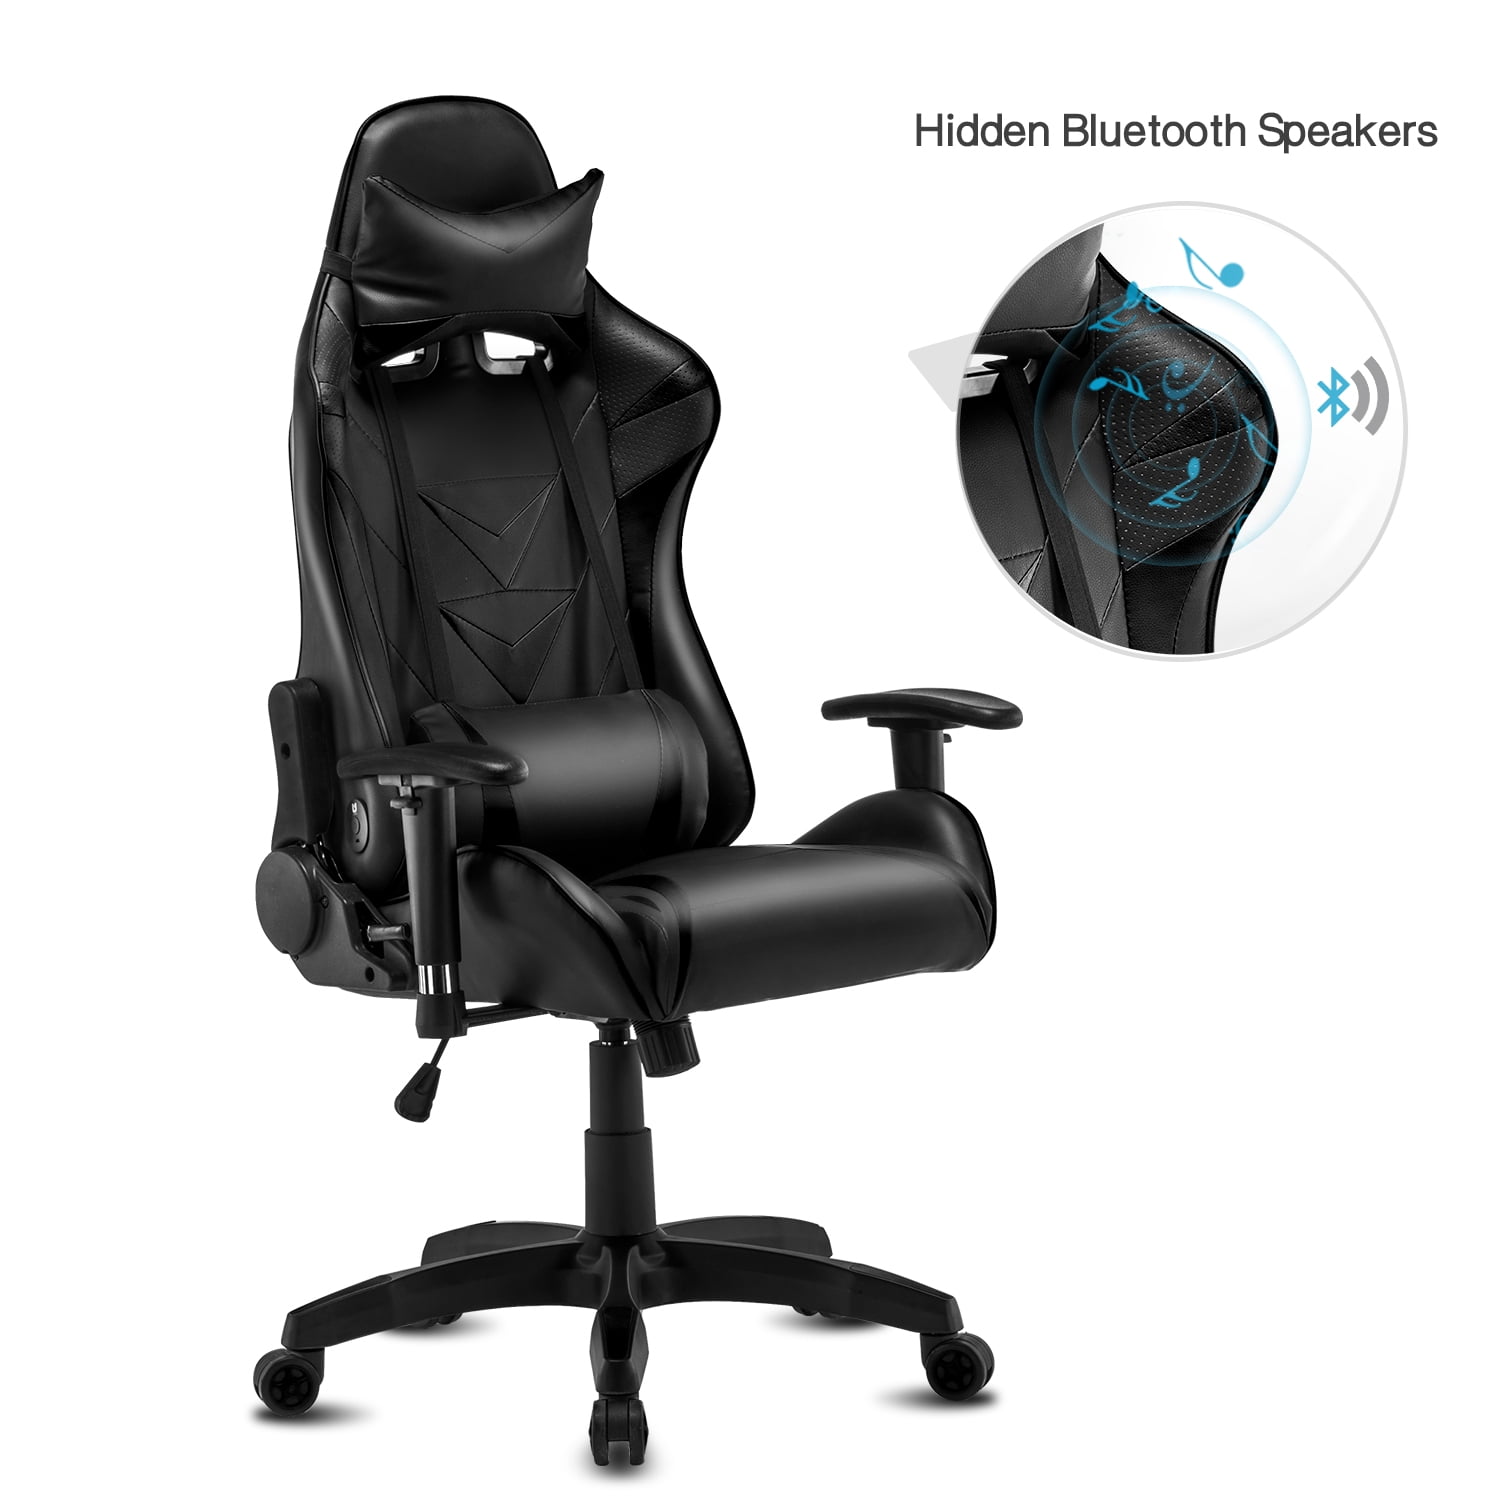 HighBack Swivel Gaming Chair Recliner with Bluetooth 4.1